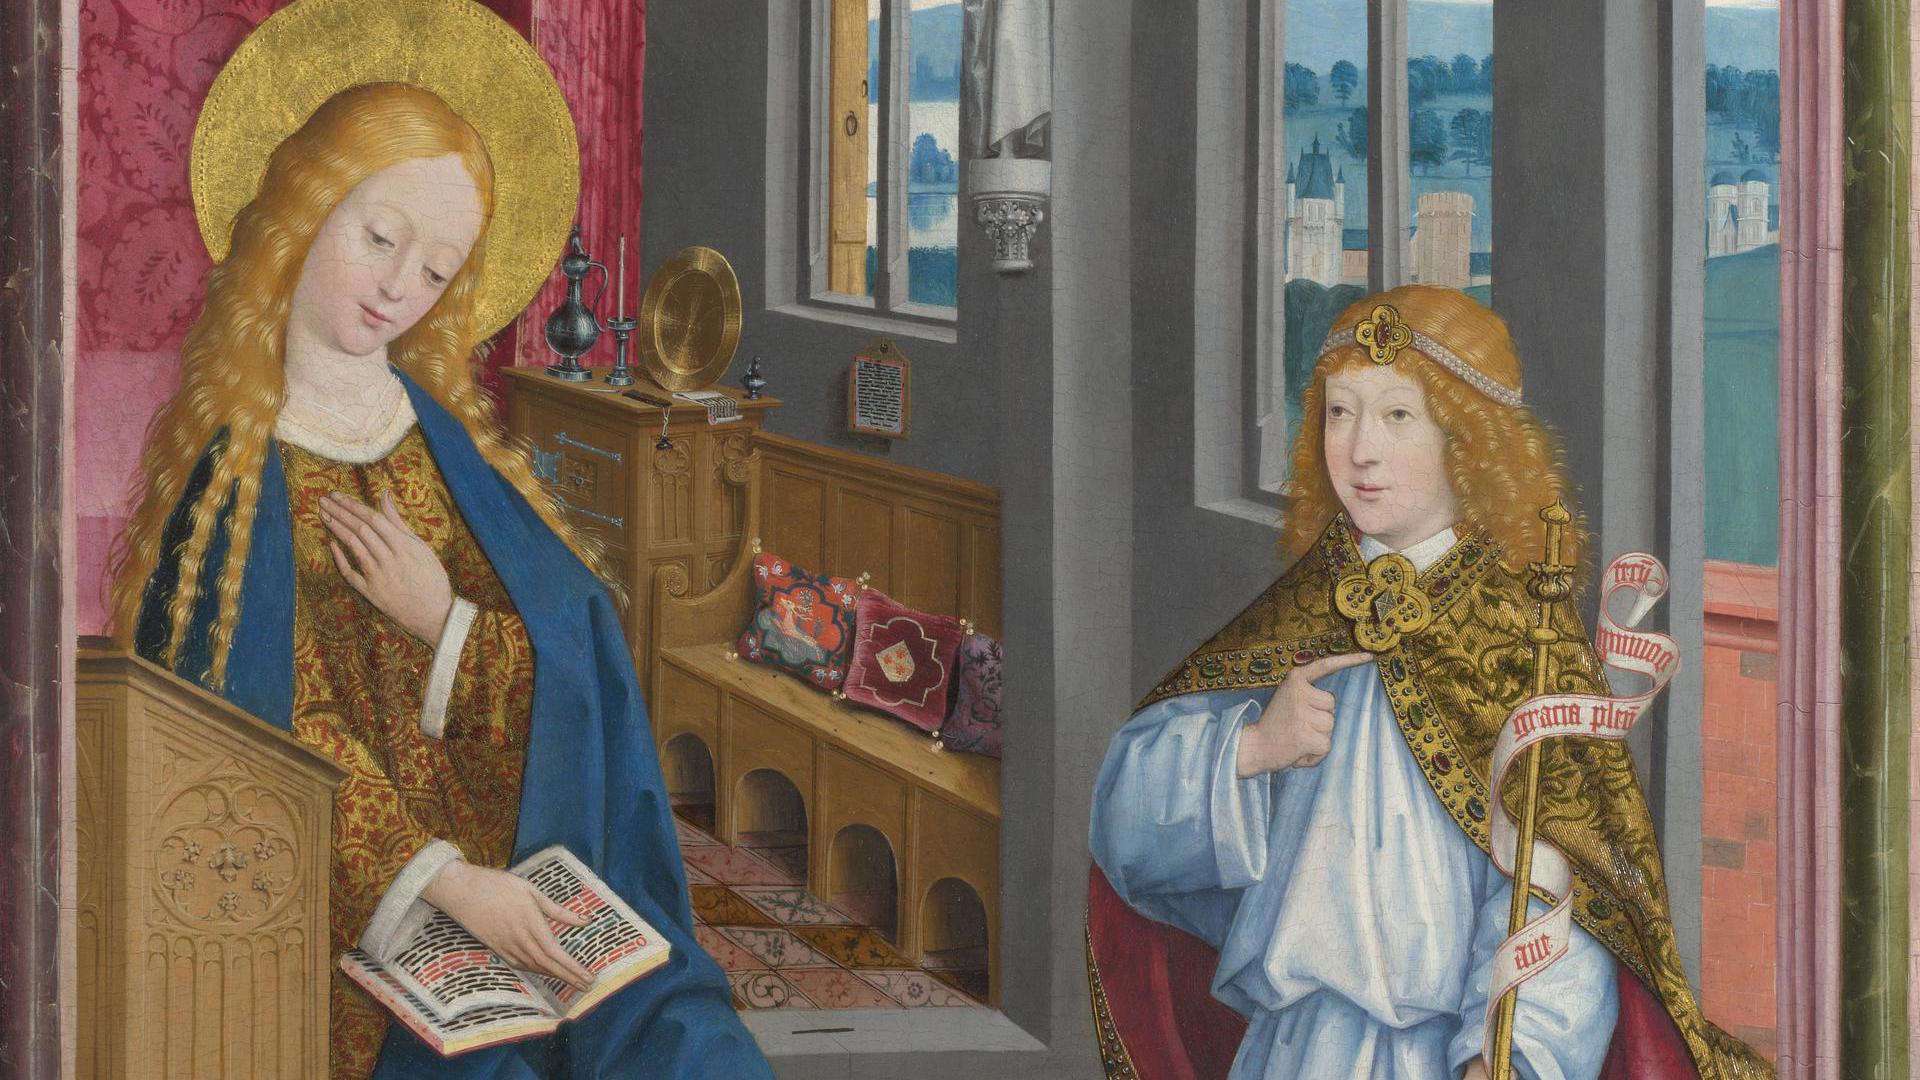 The Annunciation by Master of Liesborn